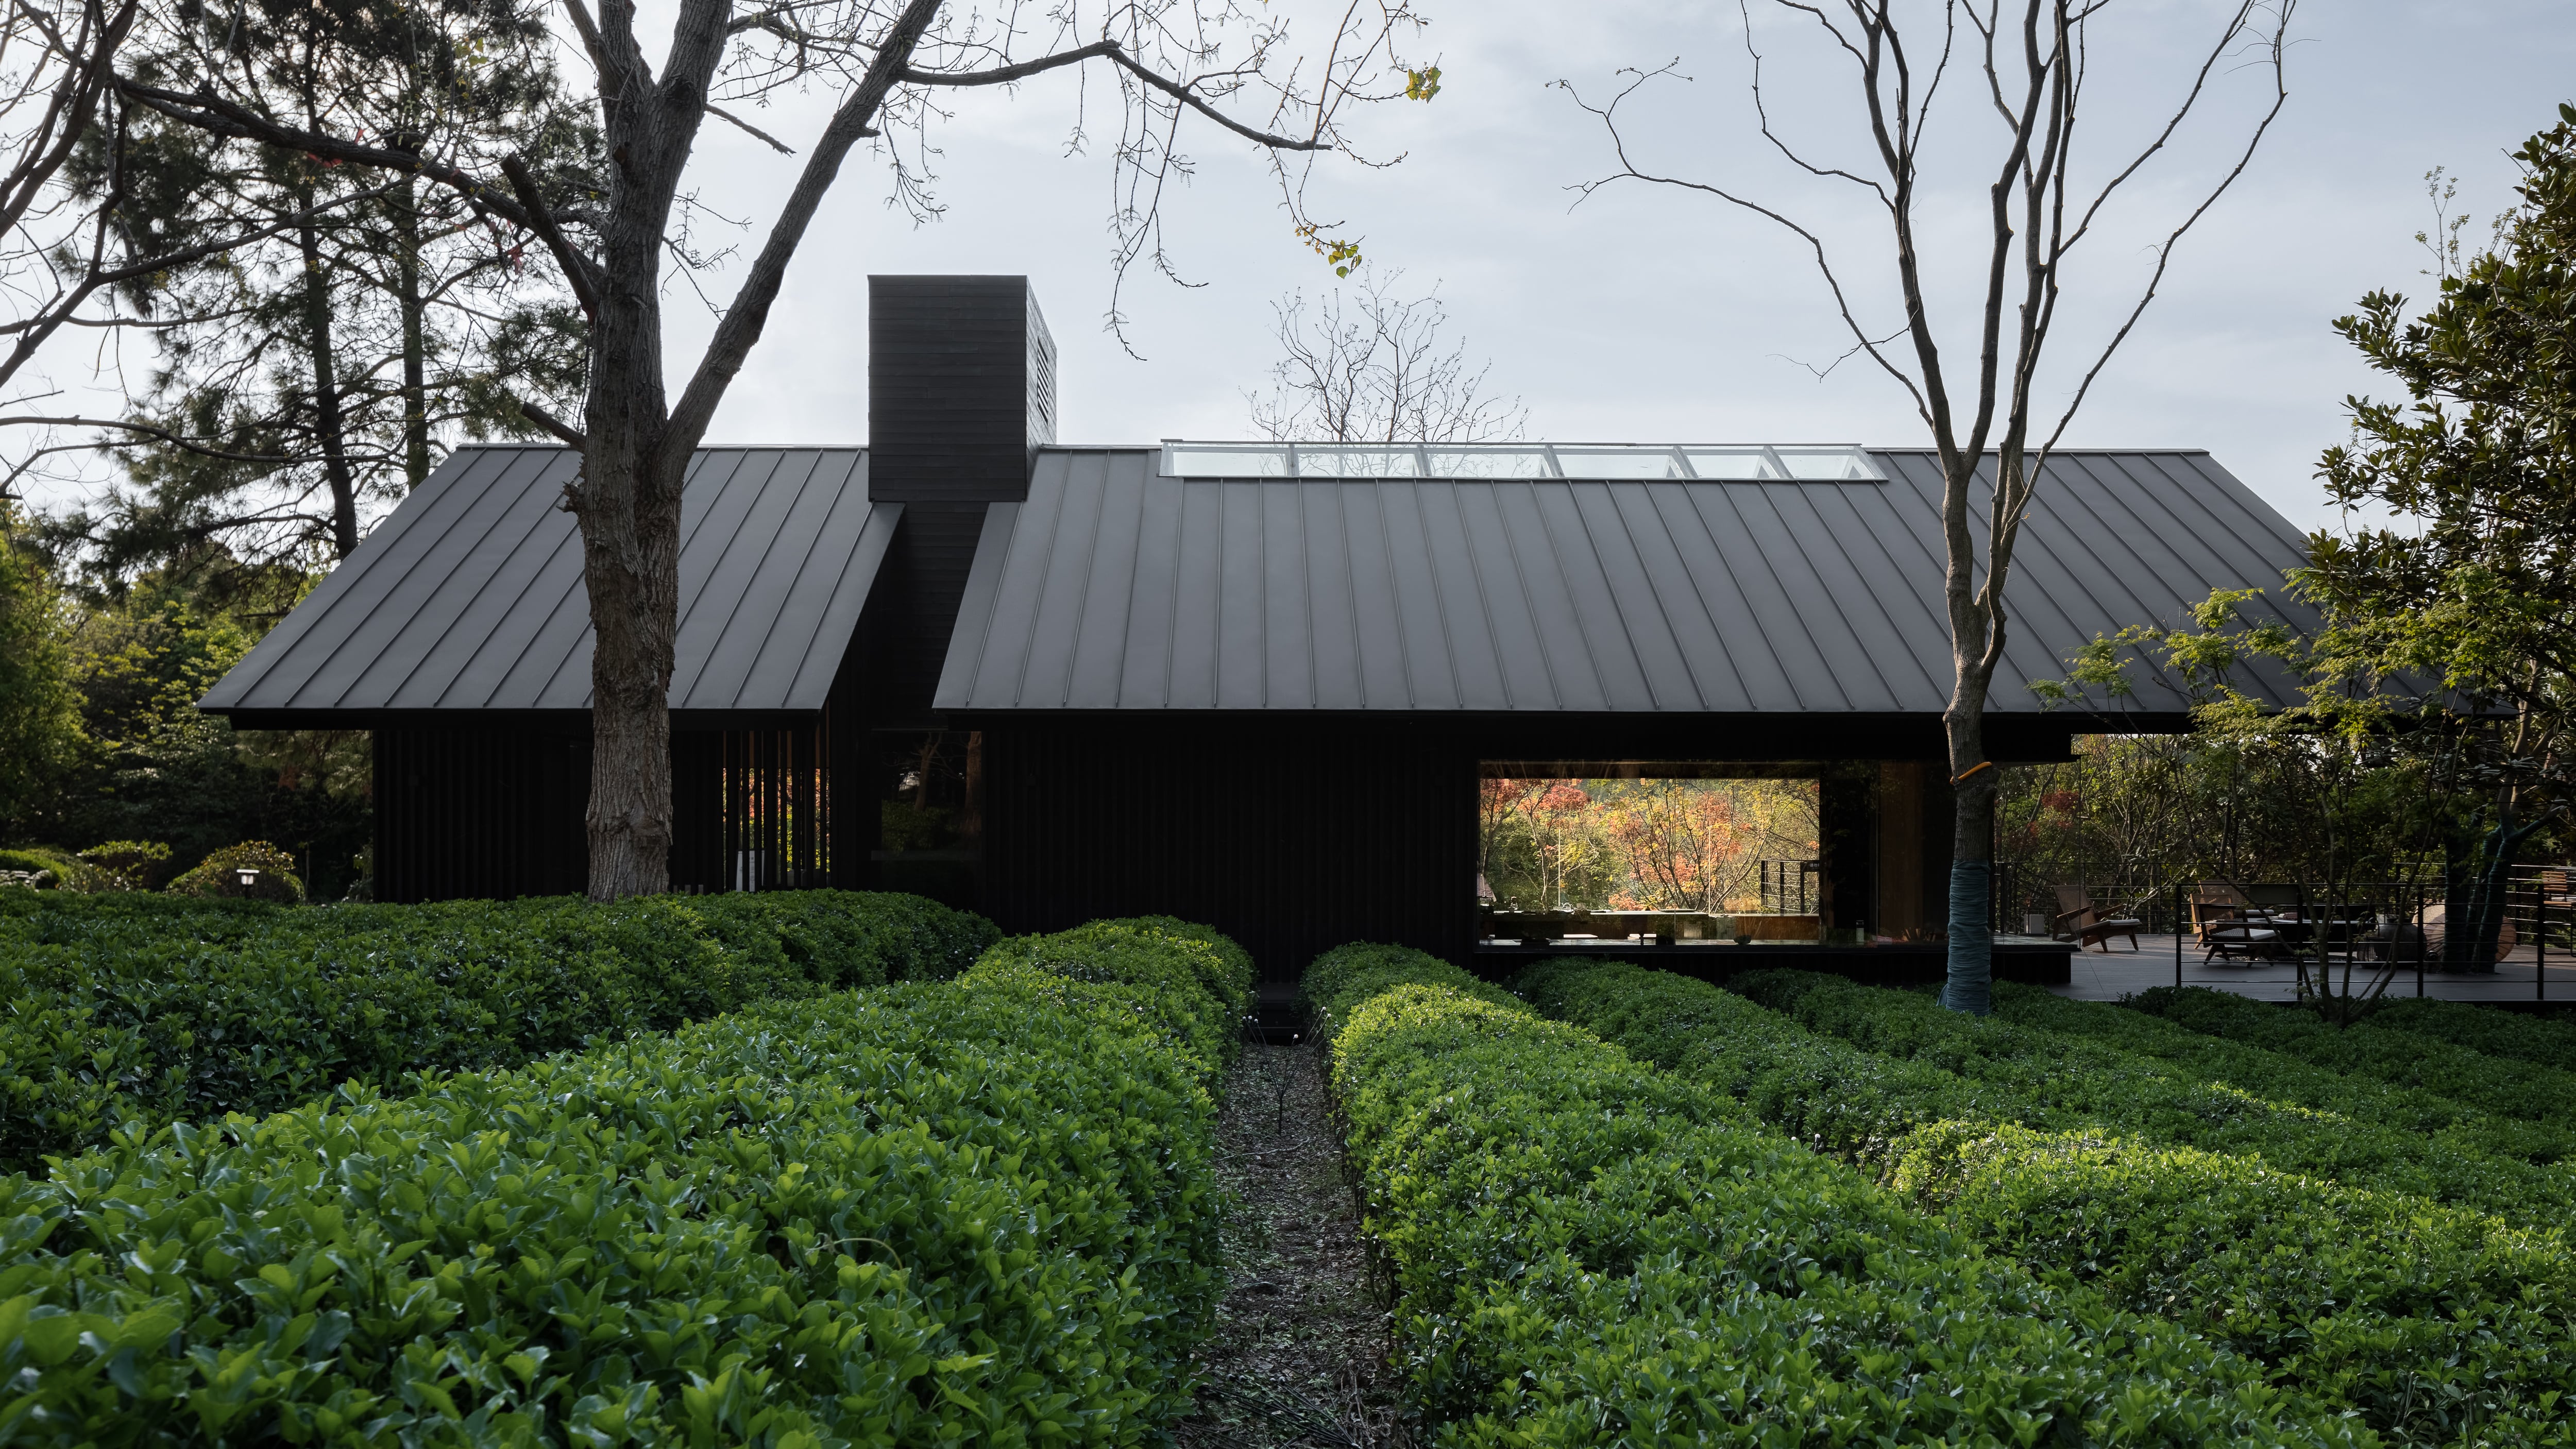 The MIX-designed forest tea house has an entirely dark facade